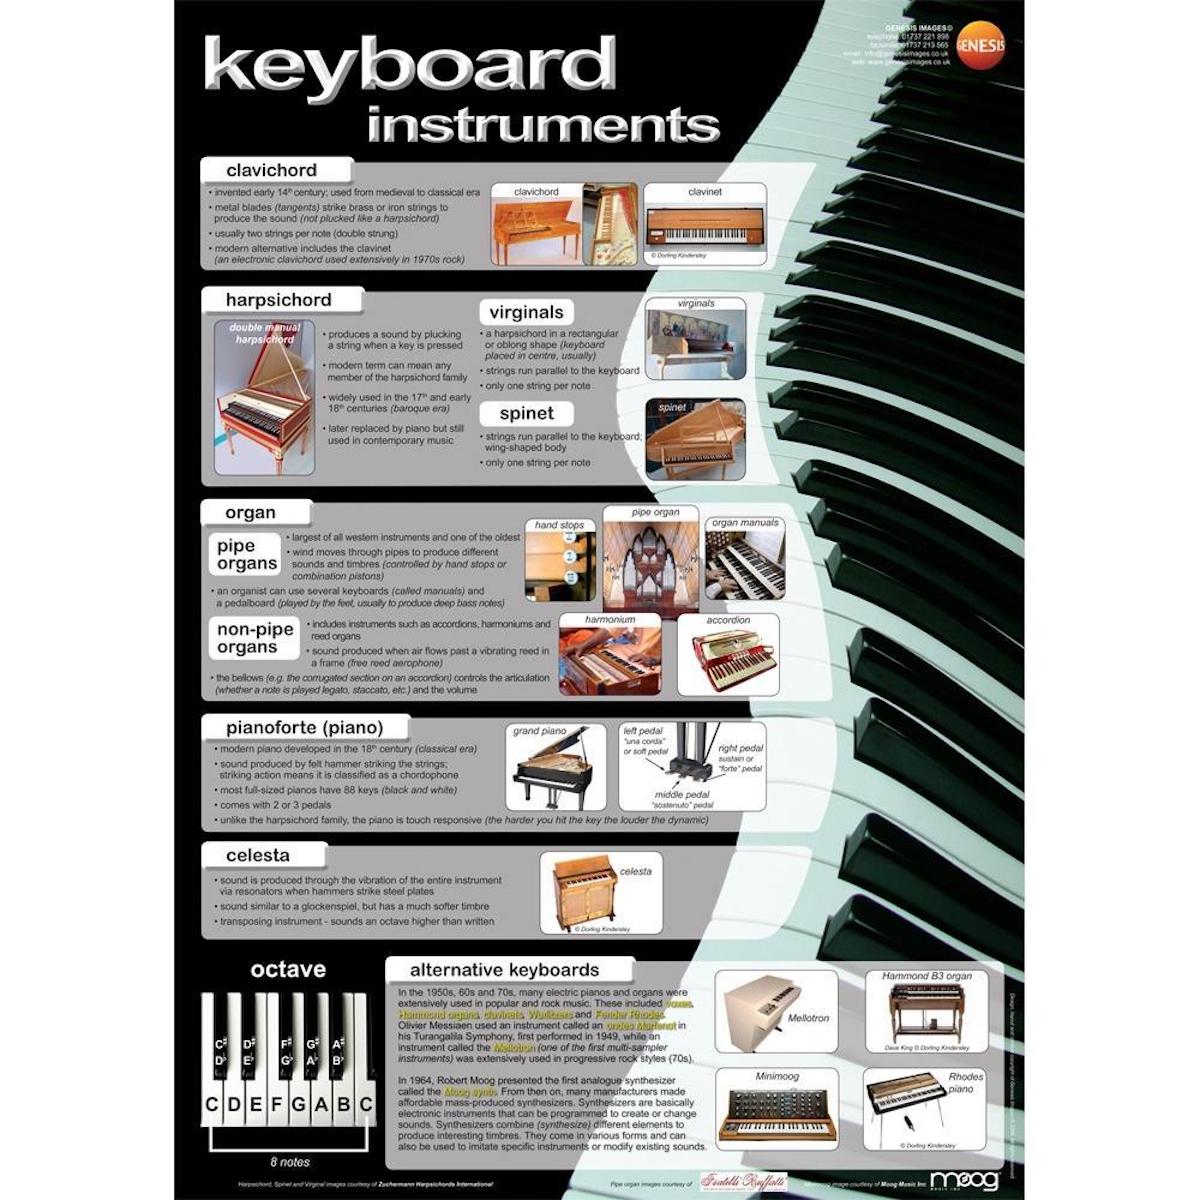 Keyboard Instruments - A1 wall poster